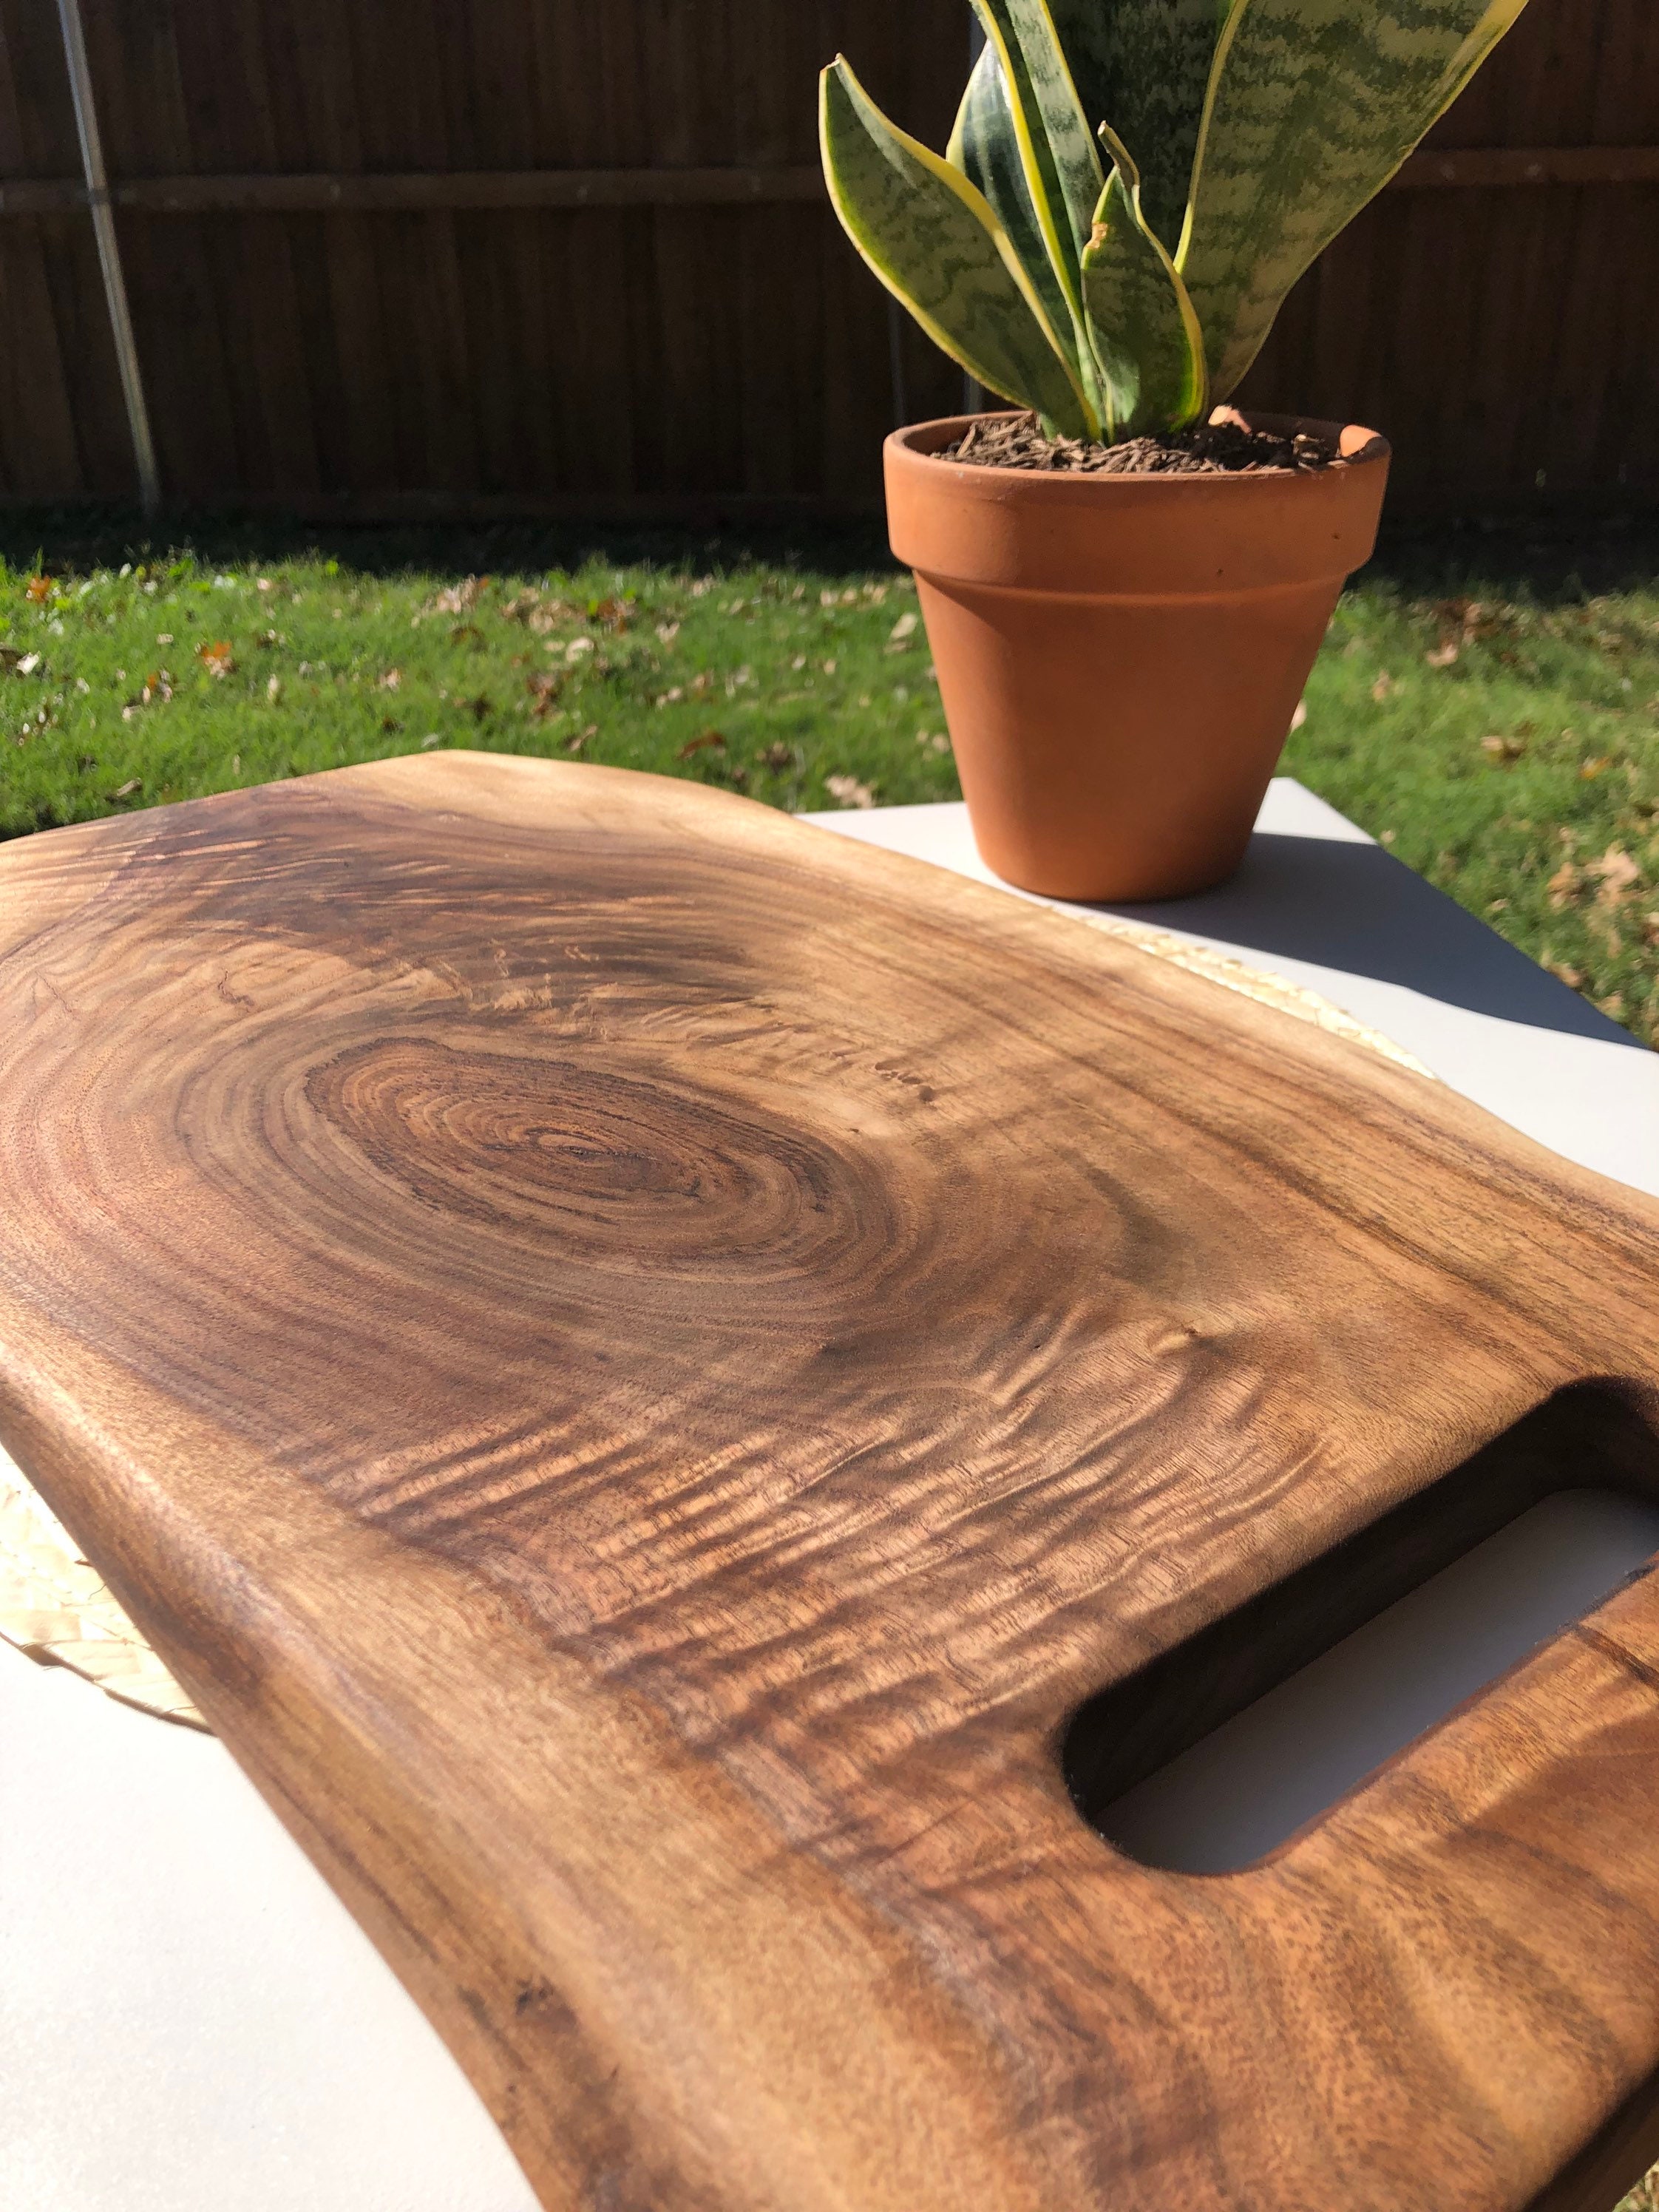 Black Walnut Footed Cutting Board - Personalized Kitchen 5th anniversary  Gift - Serving Board - Organic Live Edge Wood Cutting Board 786 —  Rusticcraft Designs